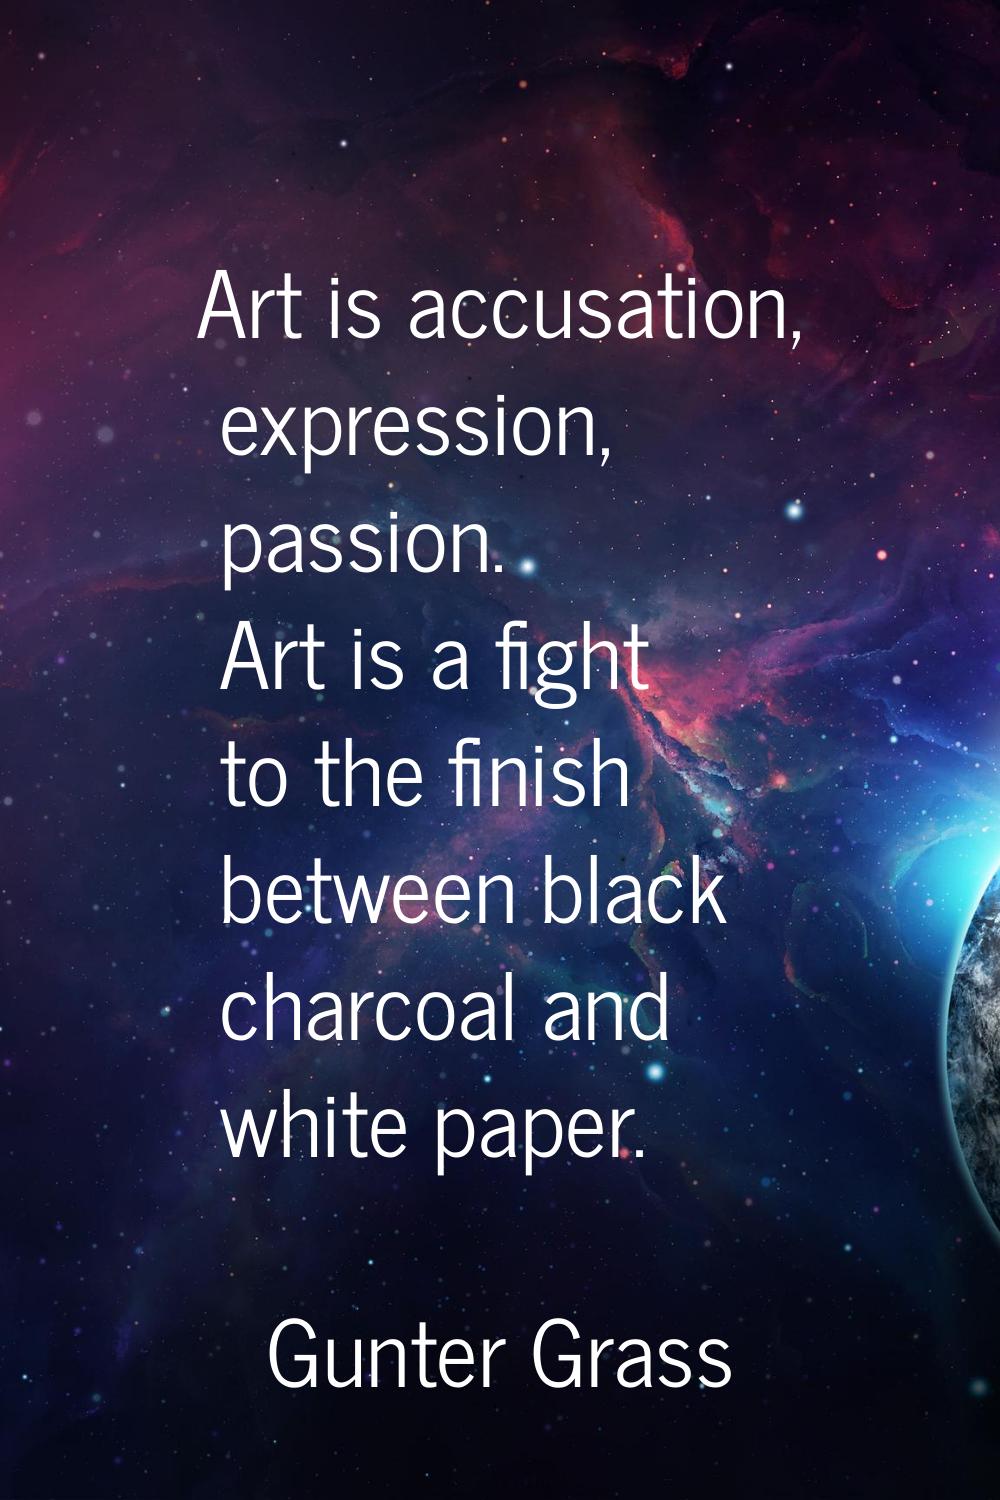 Art is accusation, expression, passion. Art is a fight to the finish between black charcoal and whi